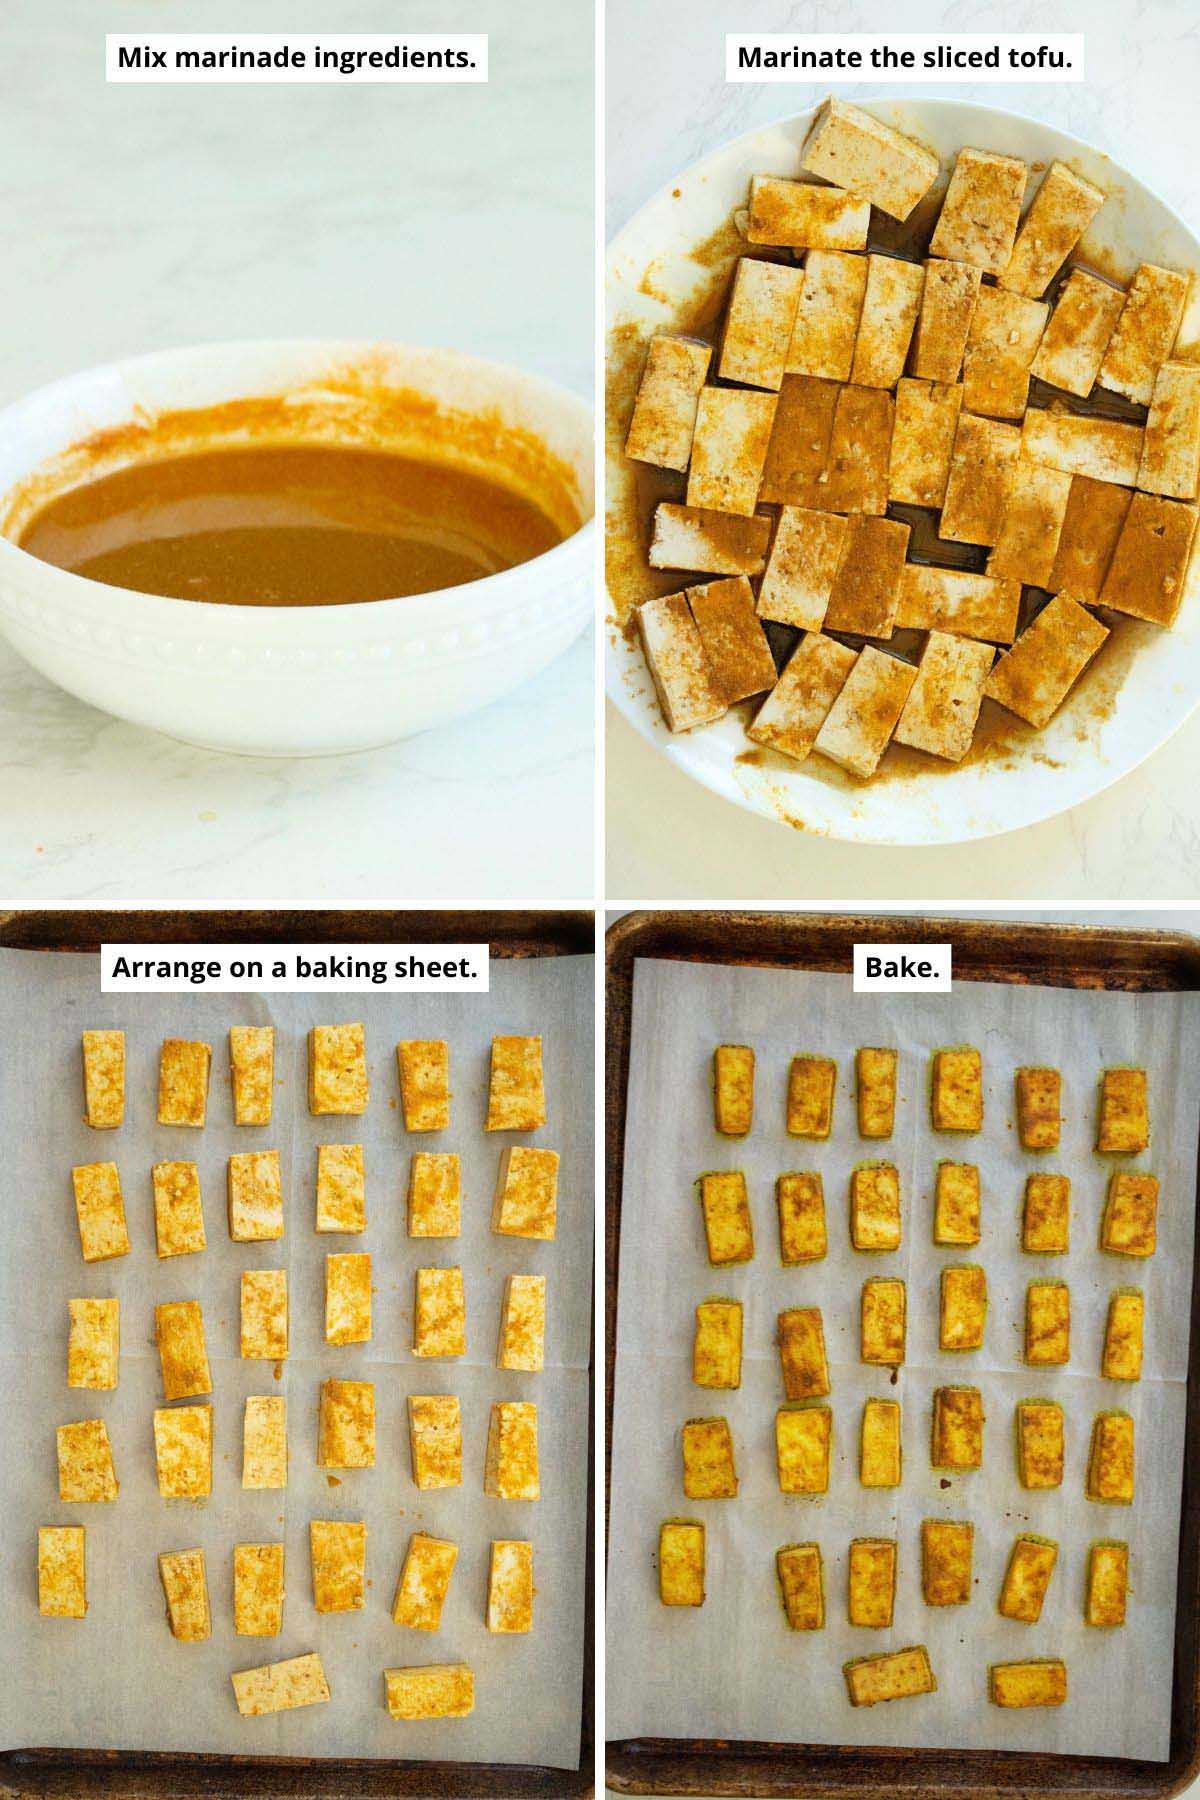 image collage showing the tofu marinade in a bowl and on the tofu and the tofu on the baking sheet before and after baking